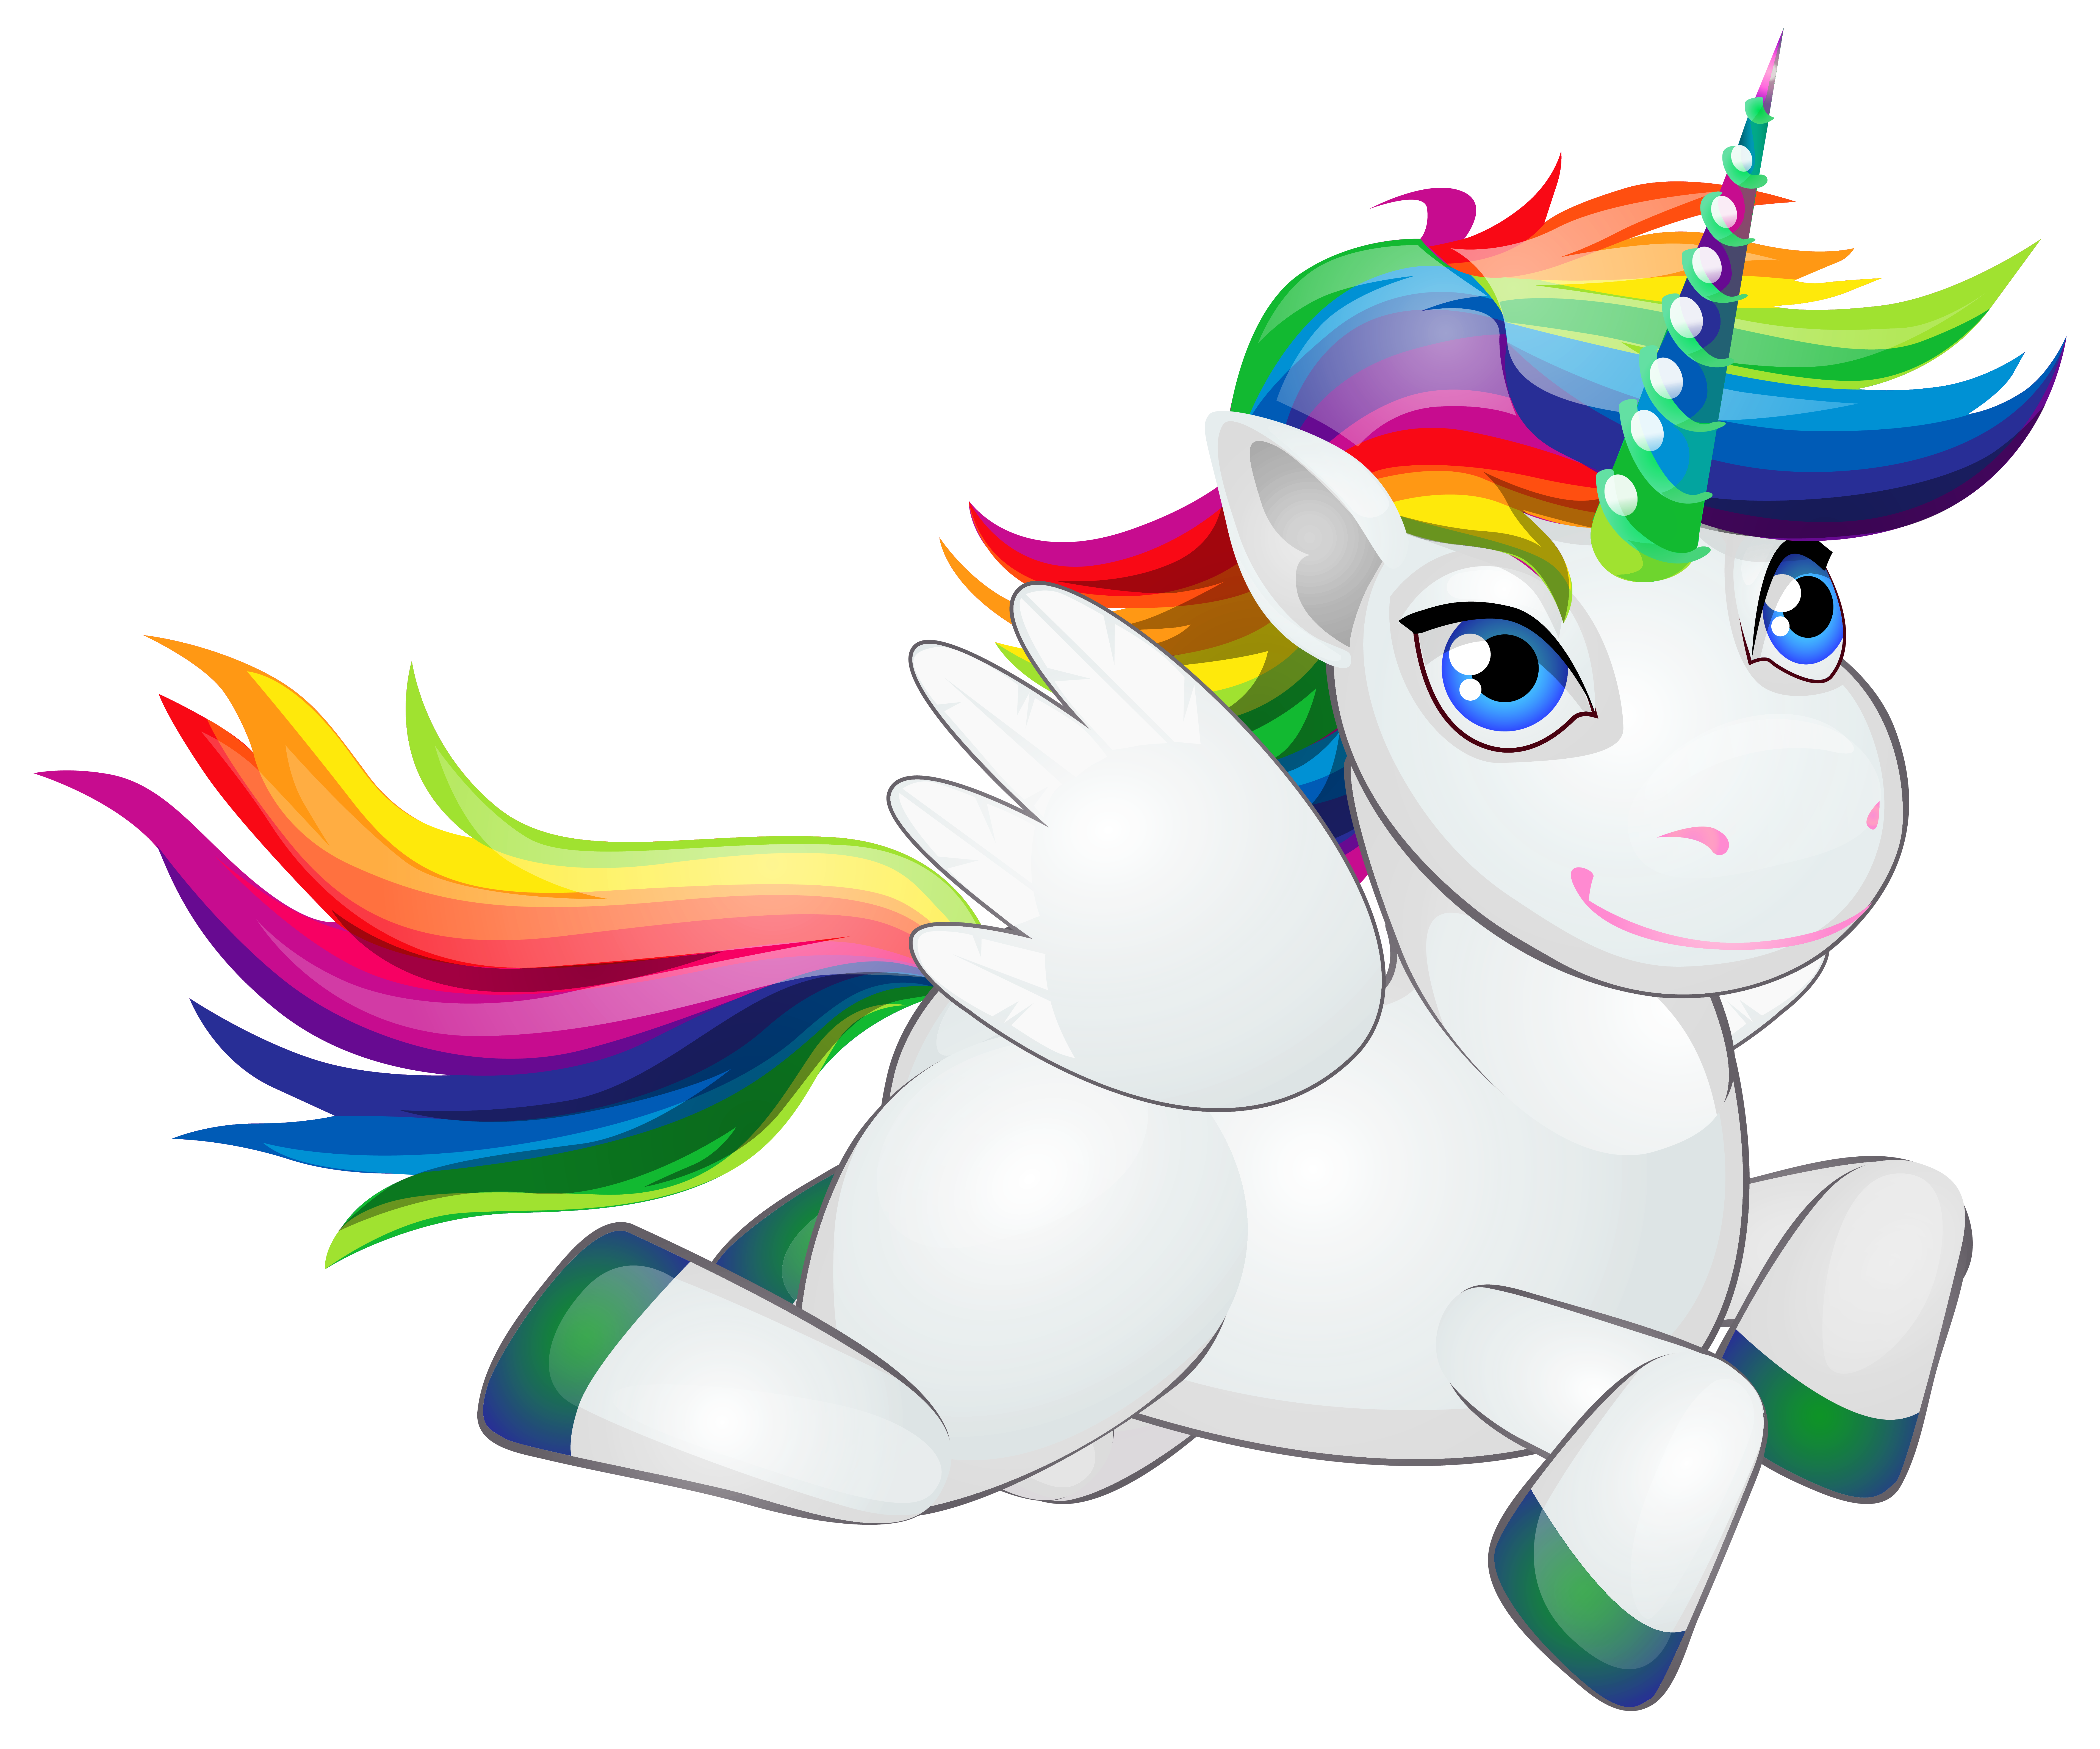 And rainbow at getdrawings. Clipart unicorn design